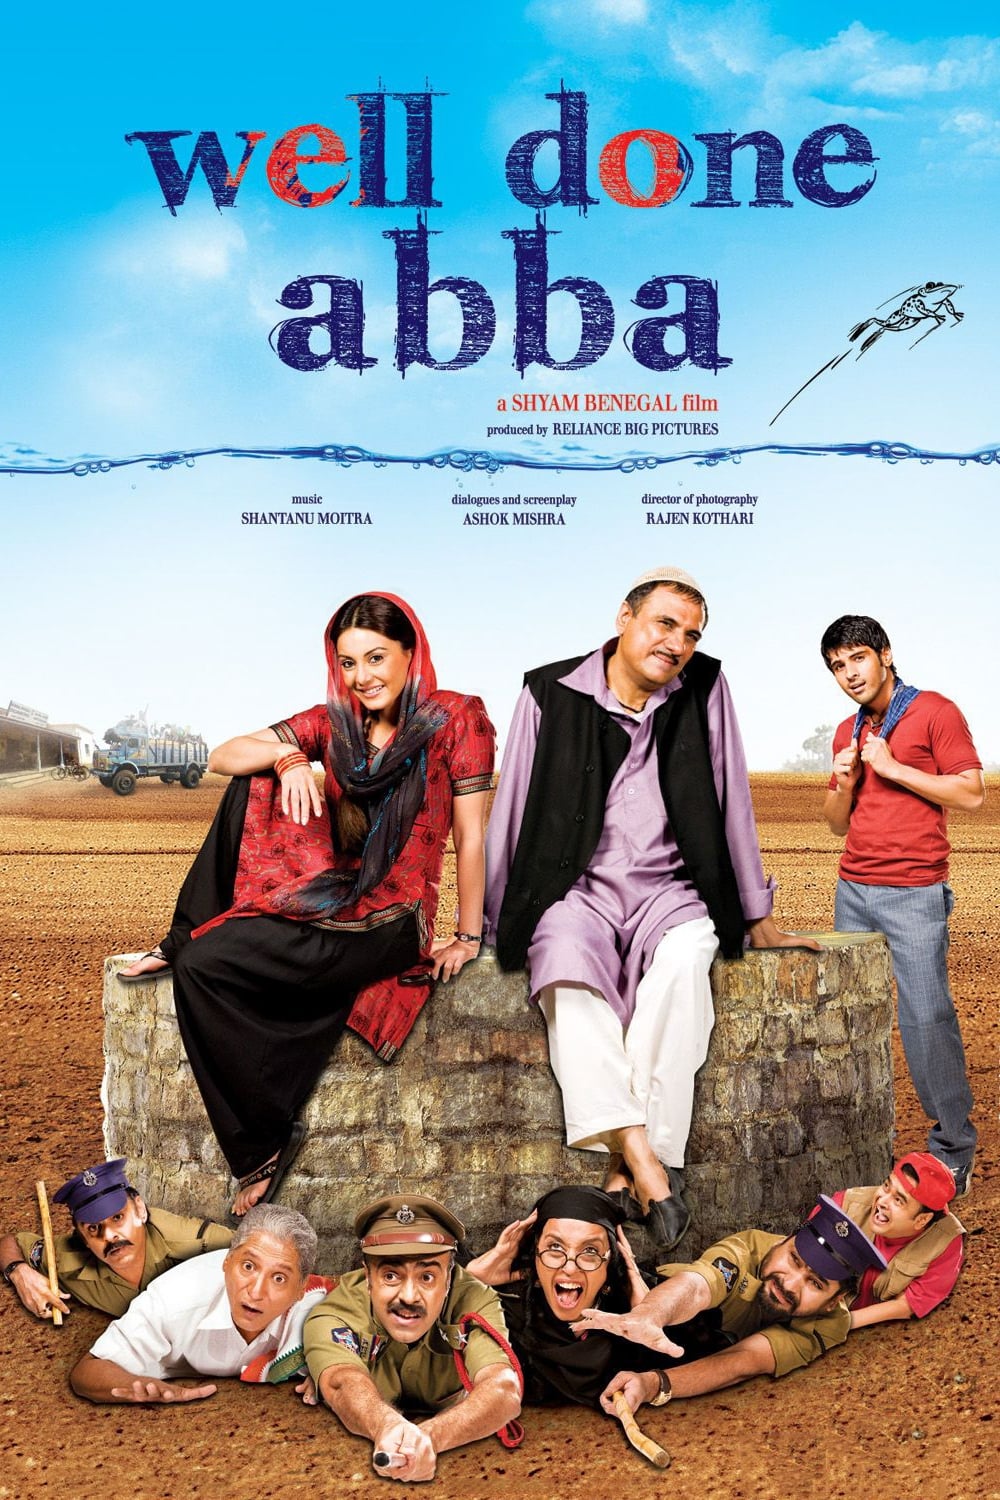 Well Done Abba (2010)